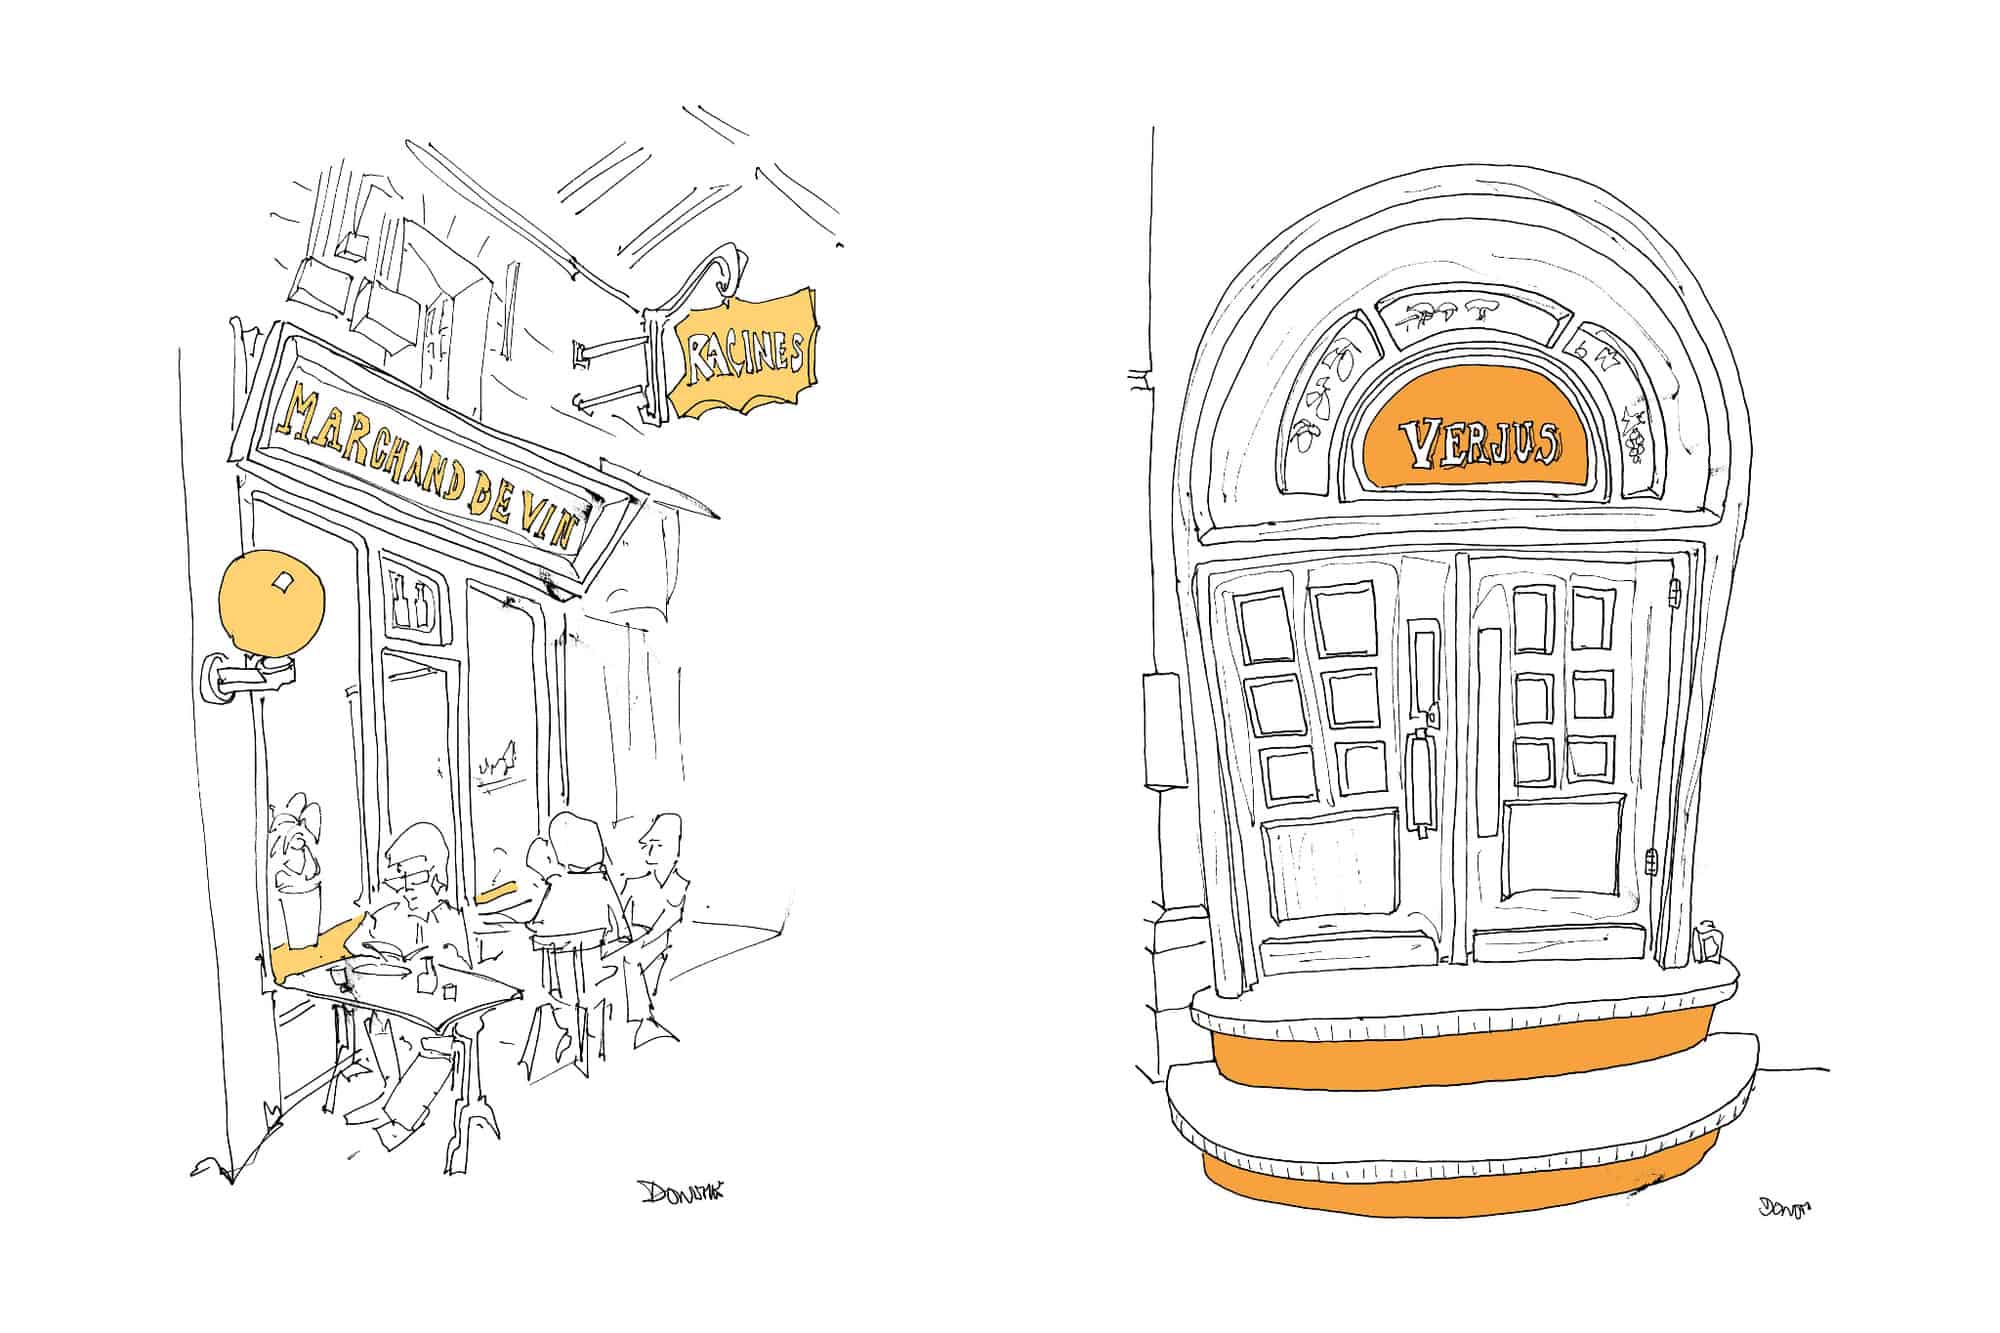 A montage of John Donohue's sketches of Parisian restaurants. On the left is a drawing of the restaurant "Racines" in black, white, and yellow. On the right is a drawing of the restaurant "Verjus", in yellow, black, and white.